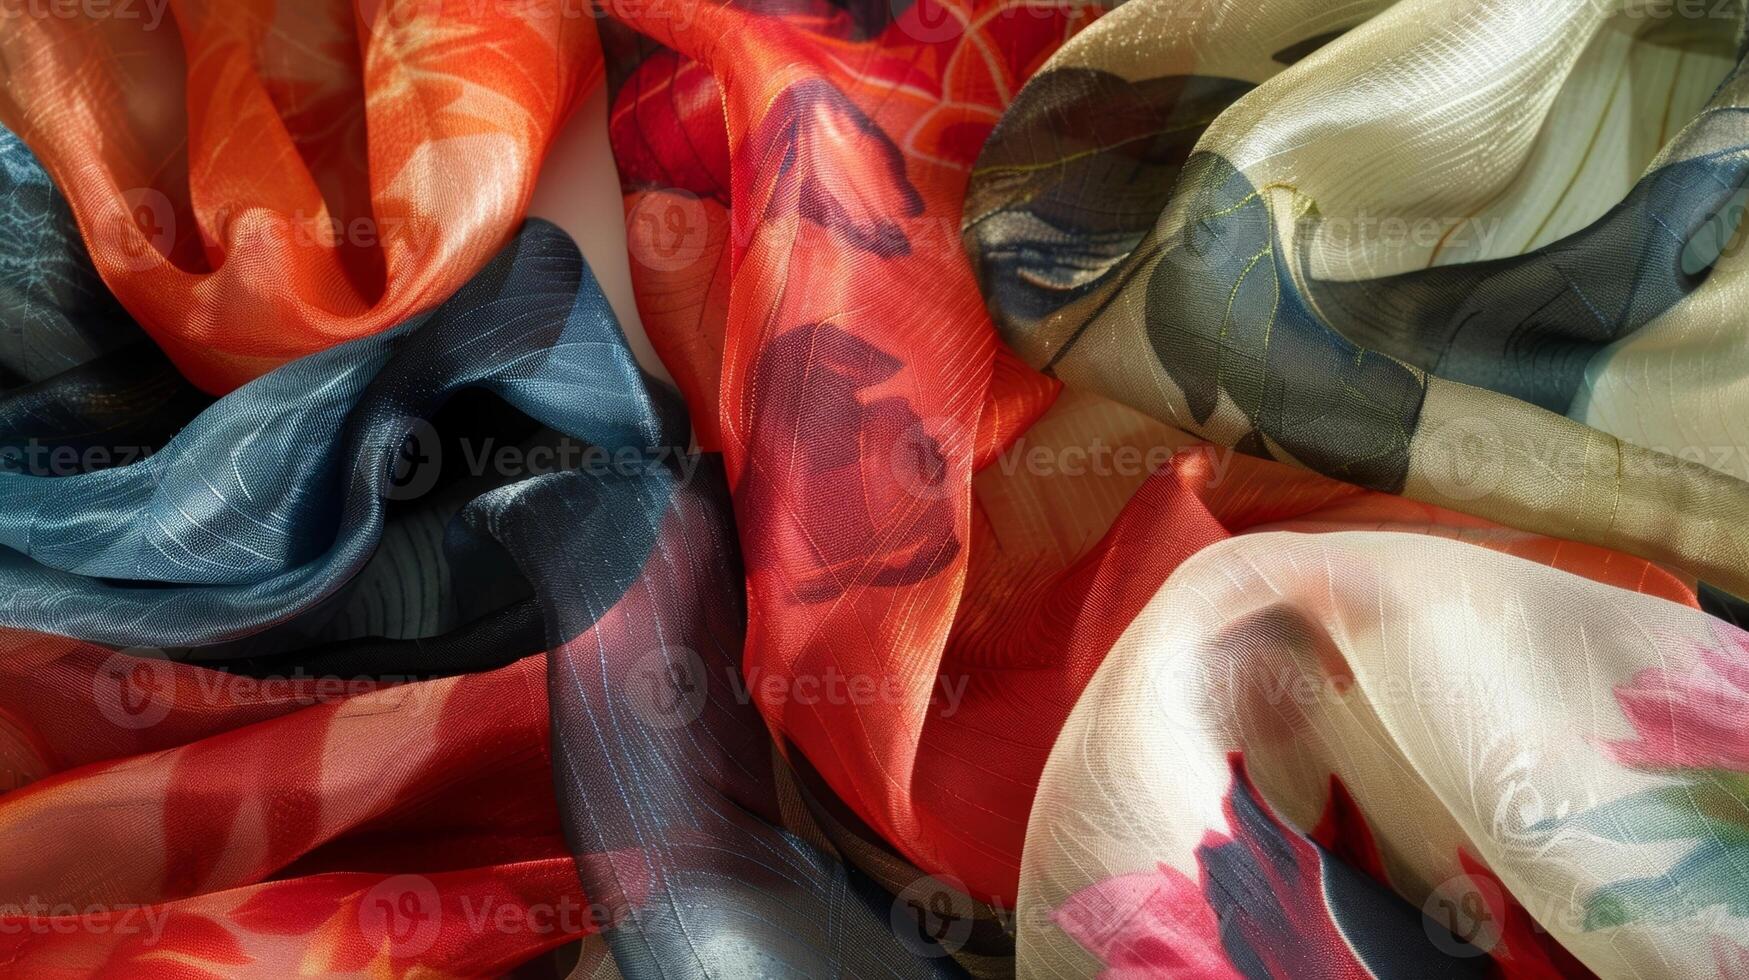 Soft to the touch and alluring to the eye these scarves evoke a sense of luxury and sophistication photo